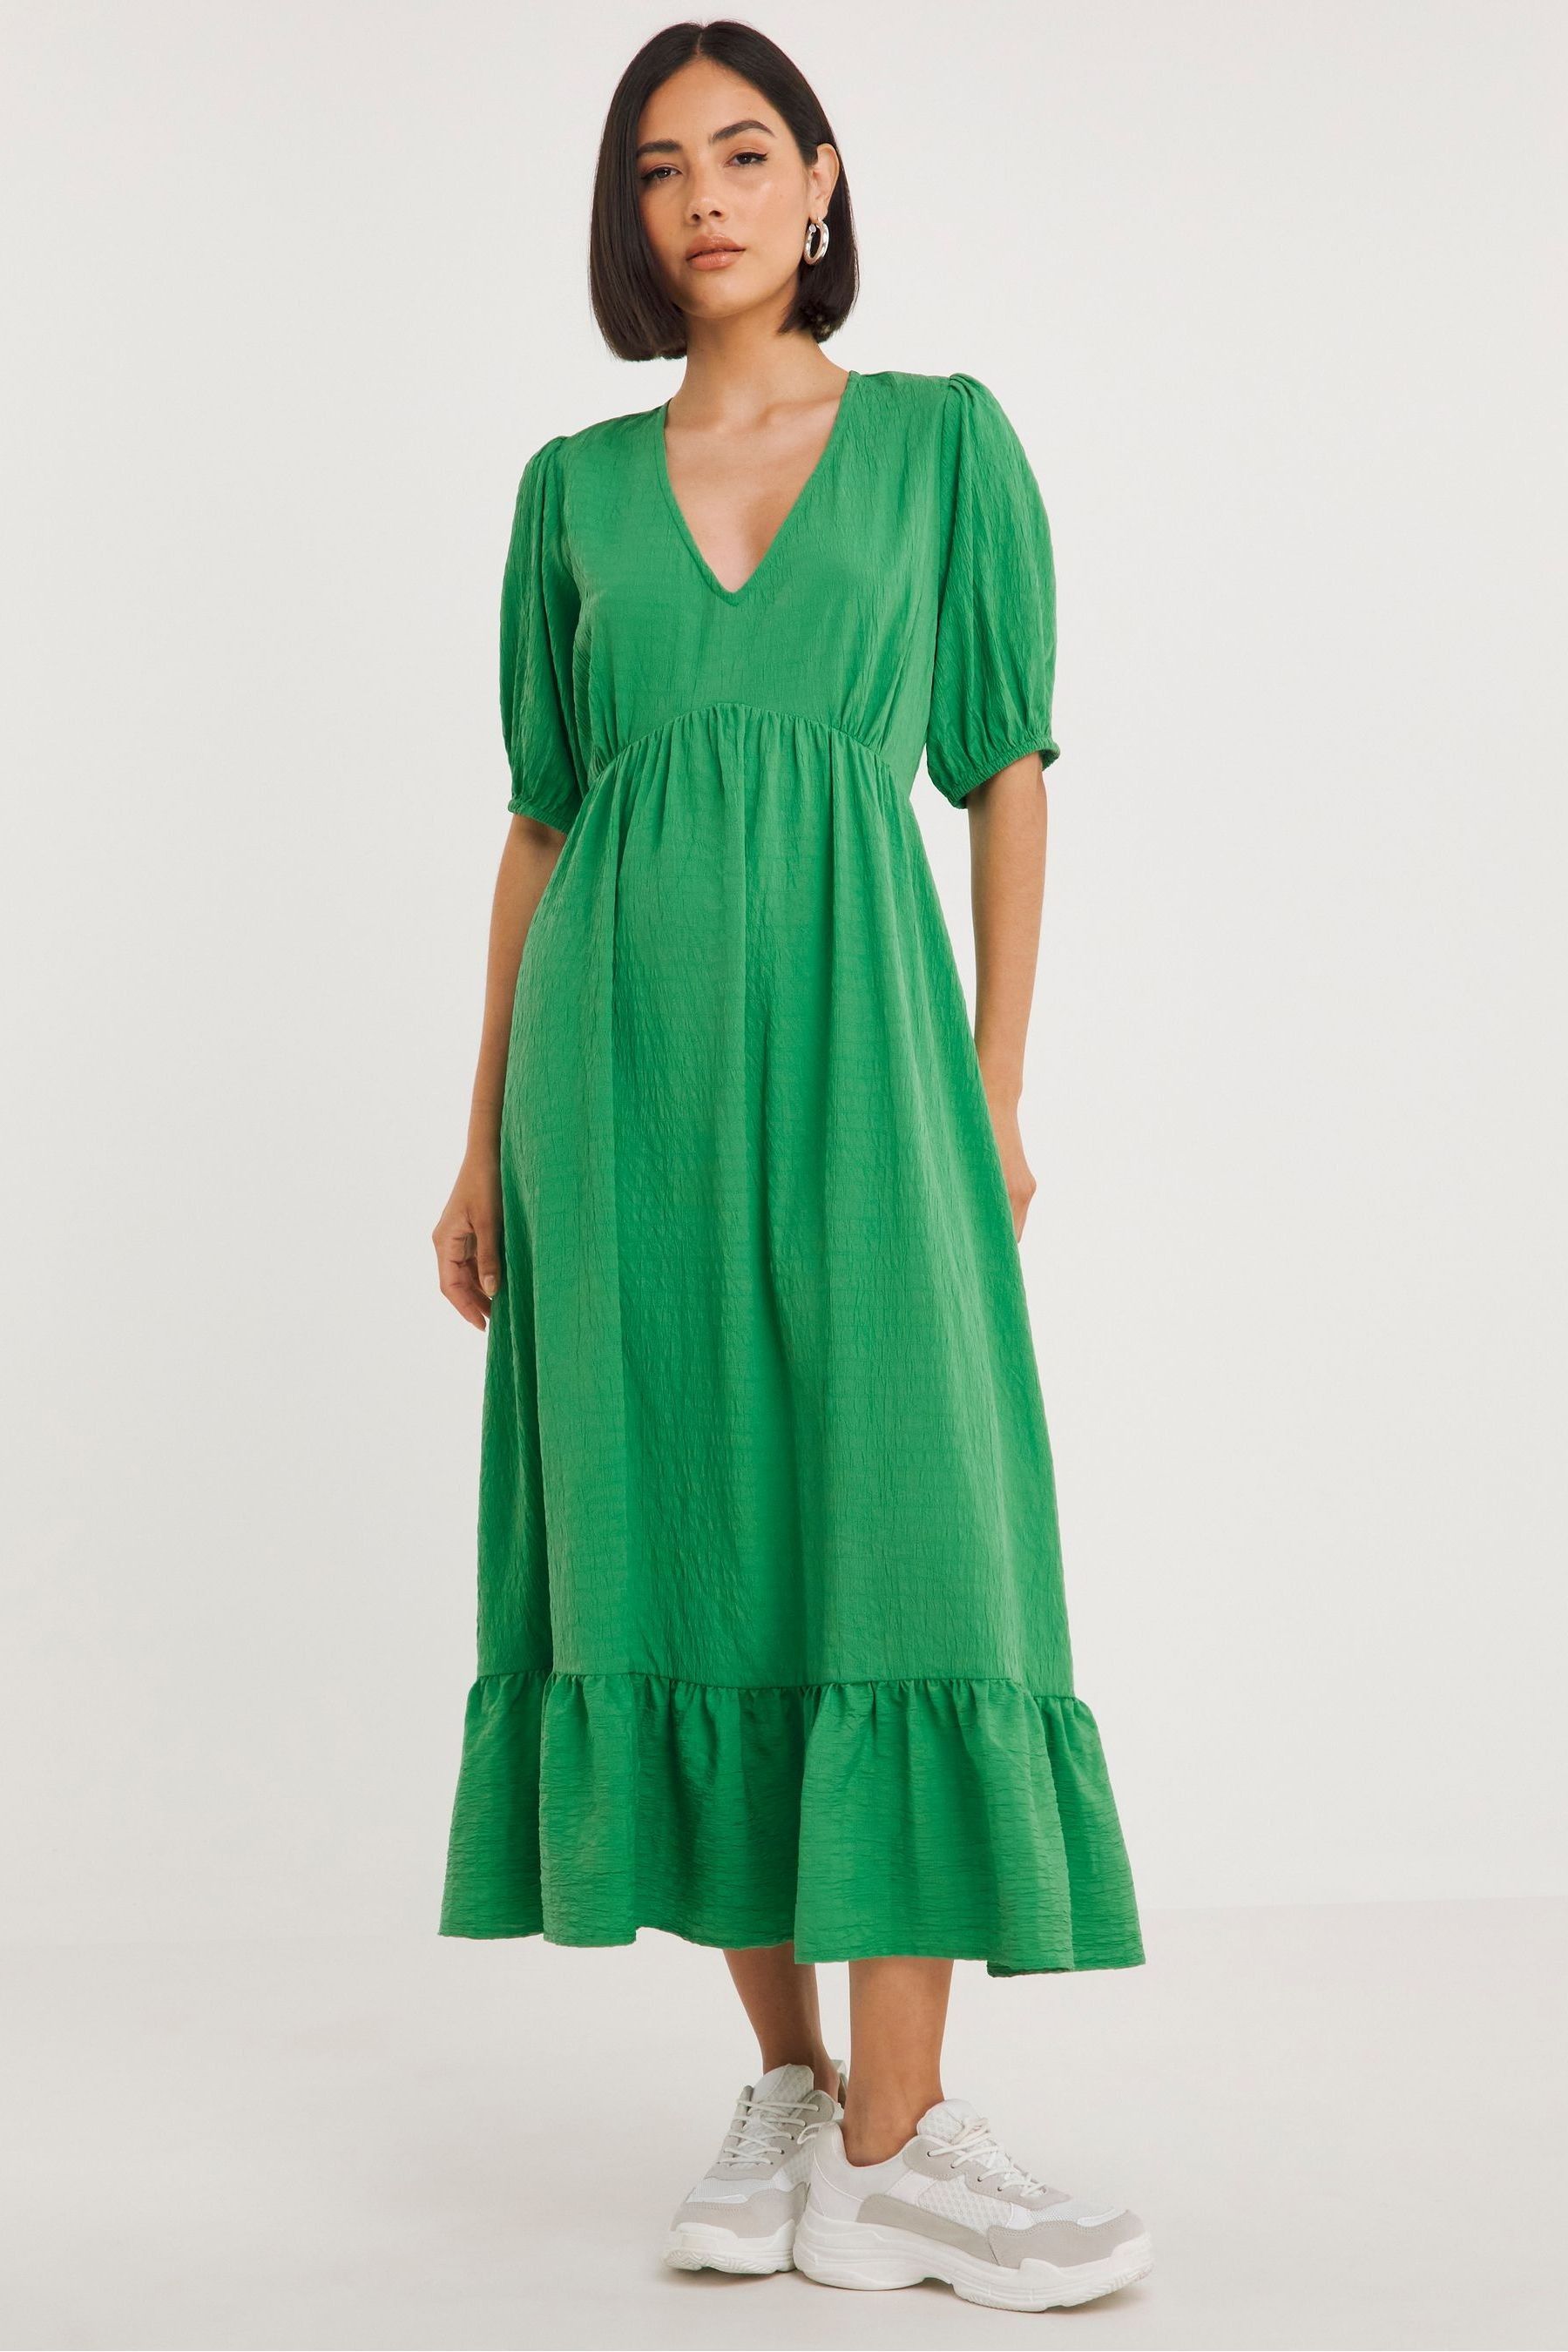 Buy Simply Be Green Textured Midi Dress from the Next UK online shop